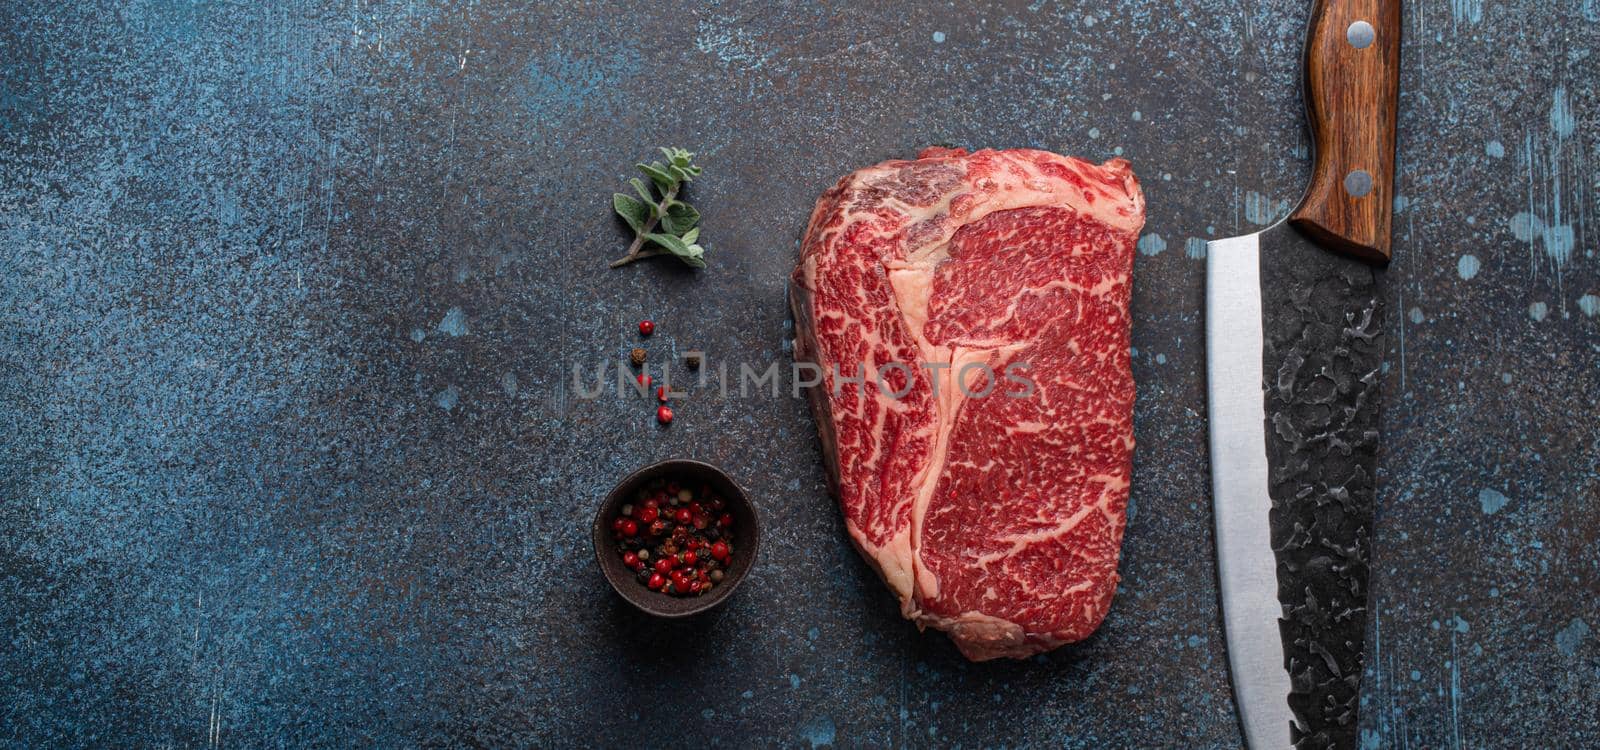 Raw meat beef marbled prime cut steak Ribeye on rustic concrete kitchen table by its_al_dente